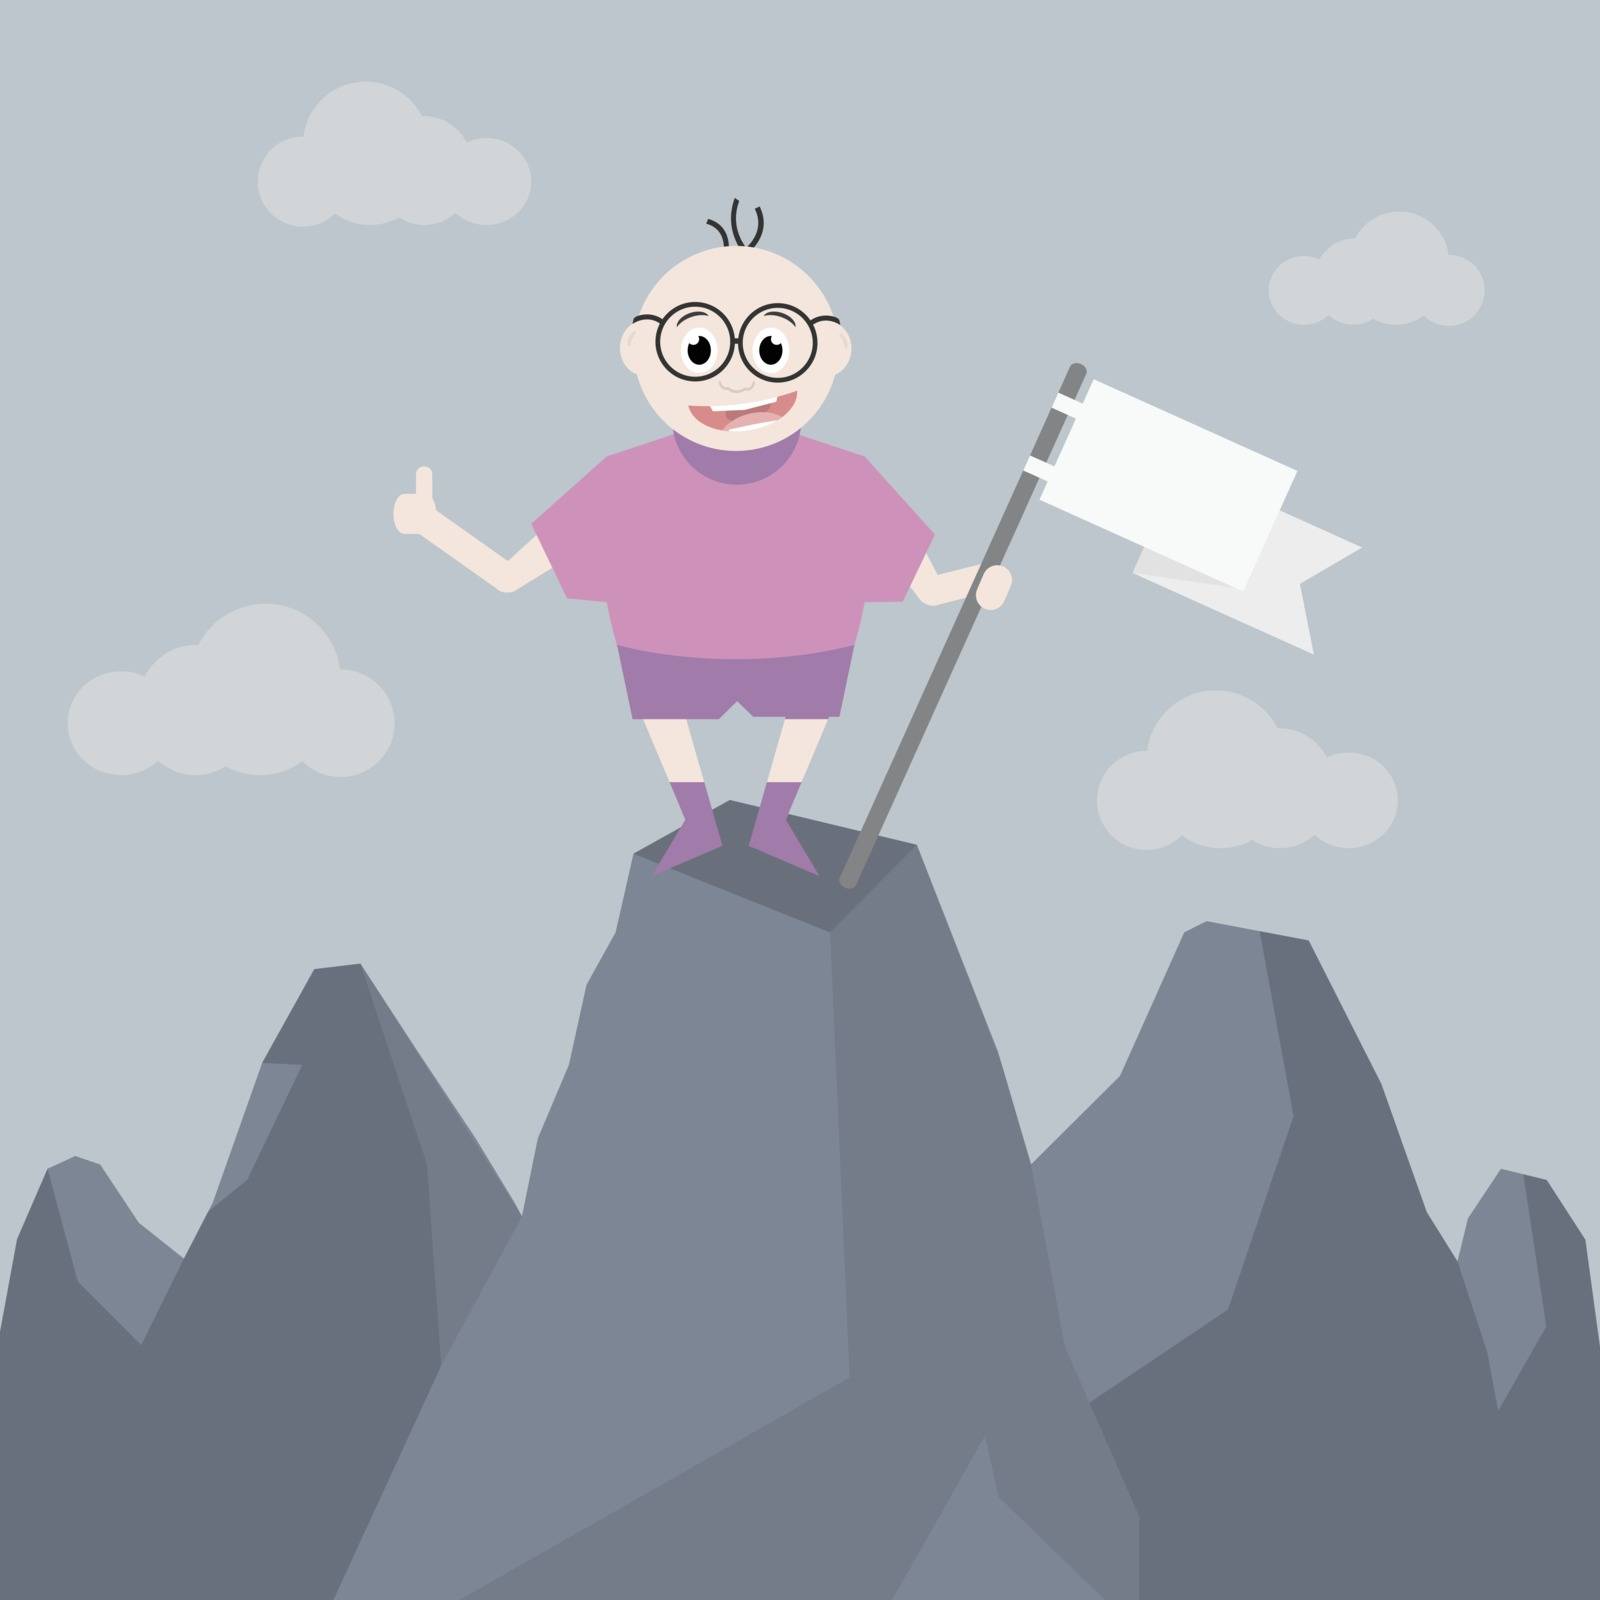 Loser in big glasses stands on a high hill and holding a white flag